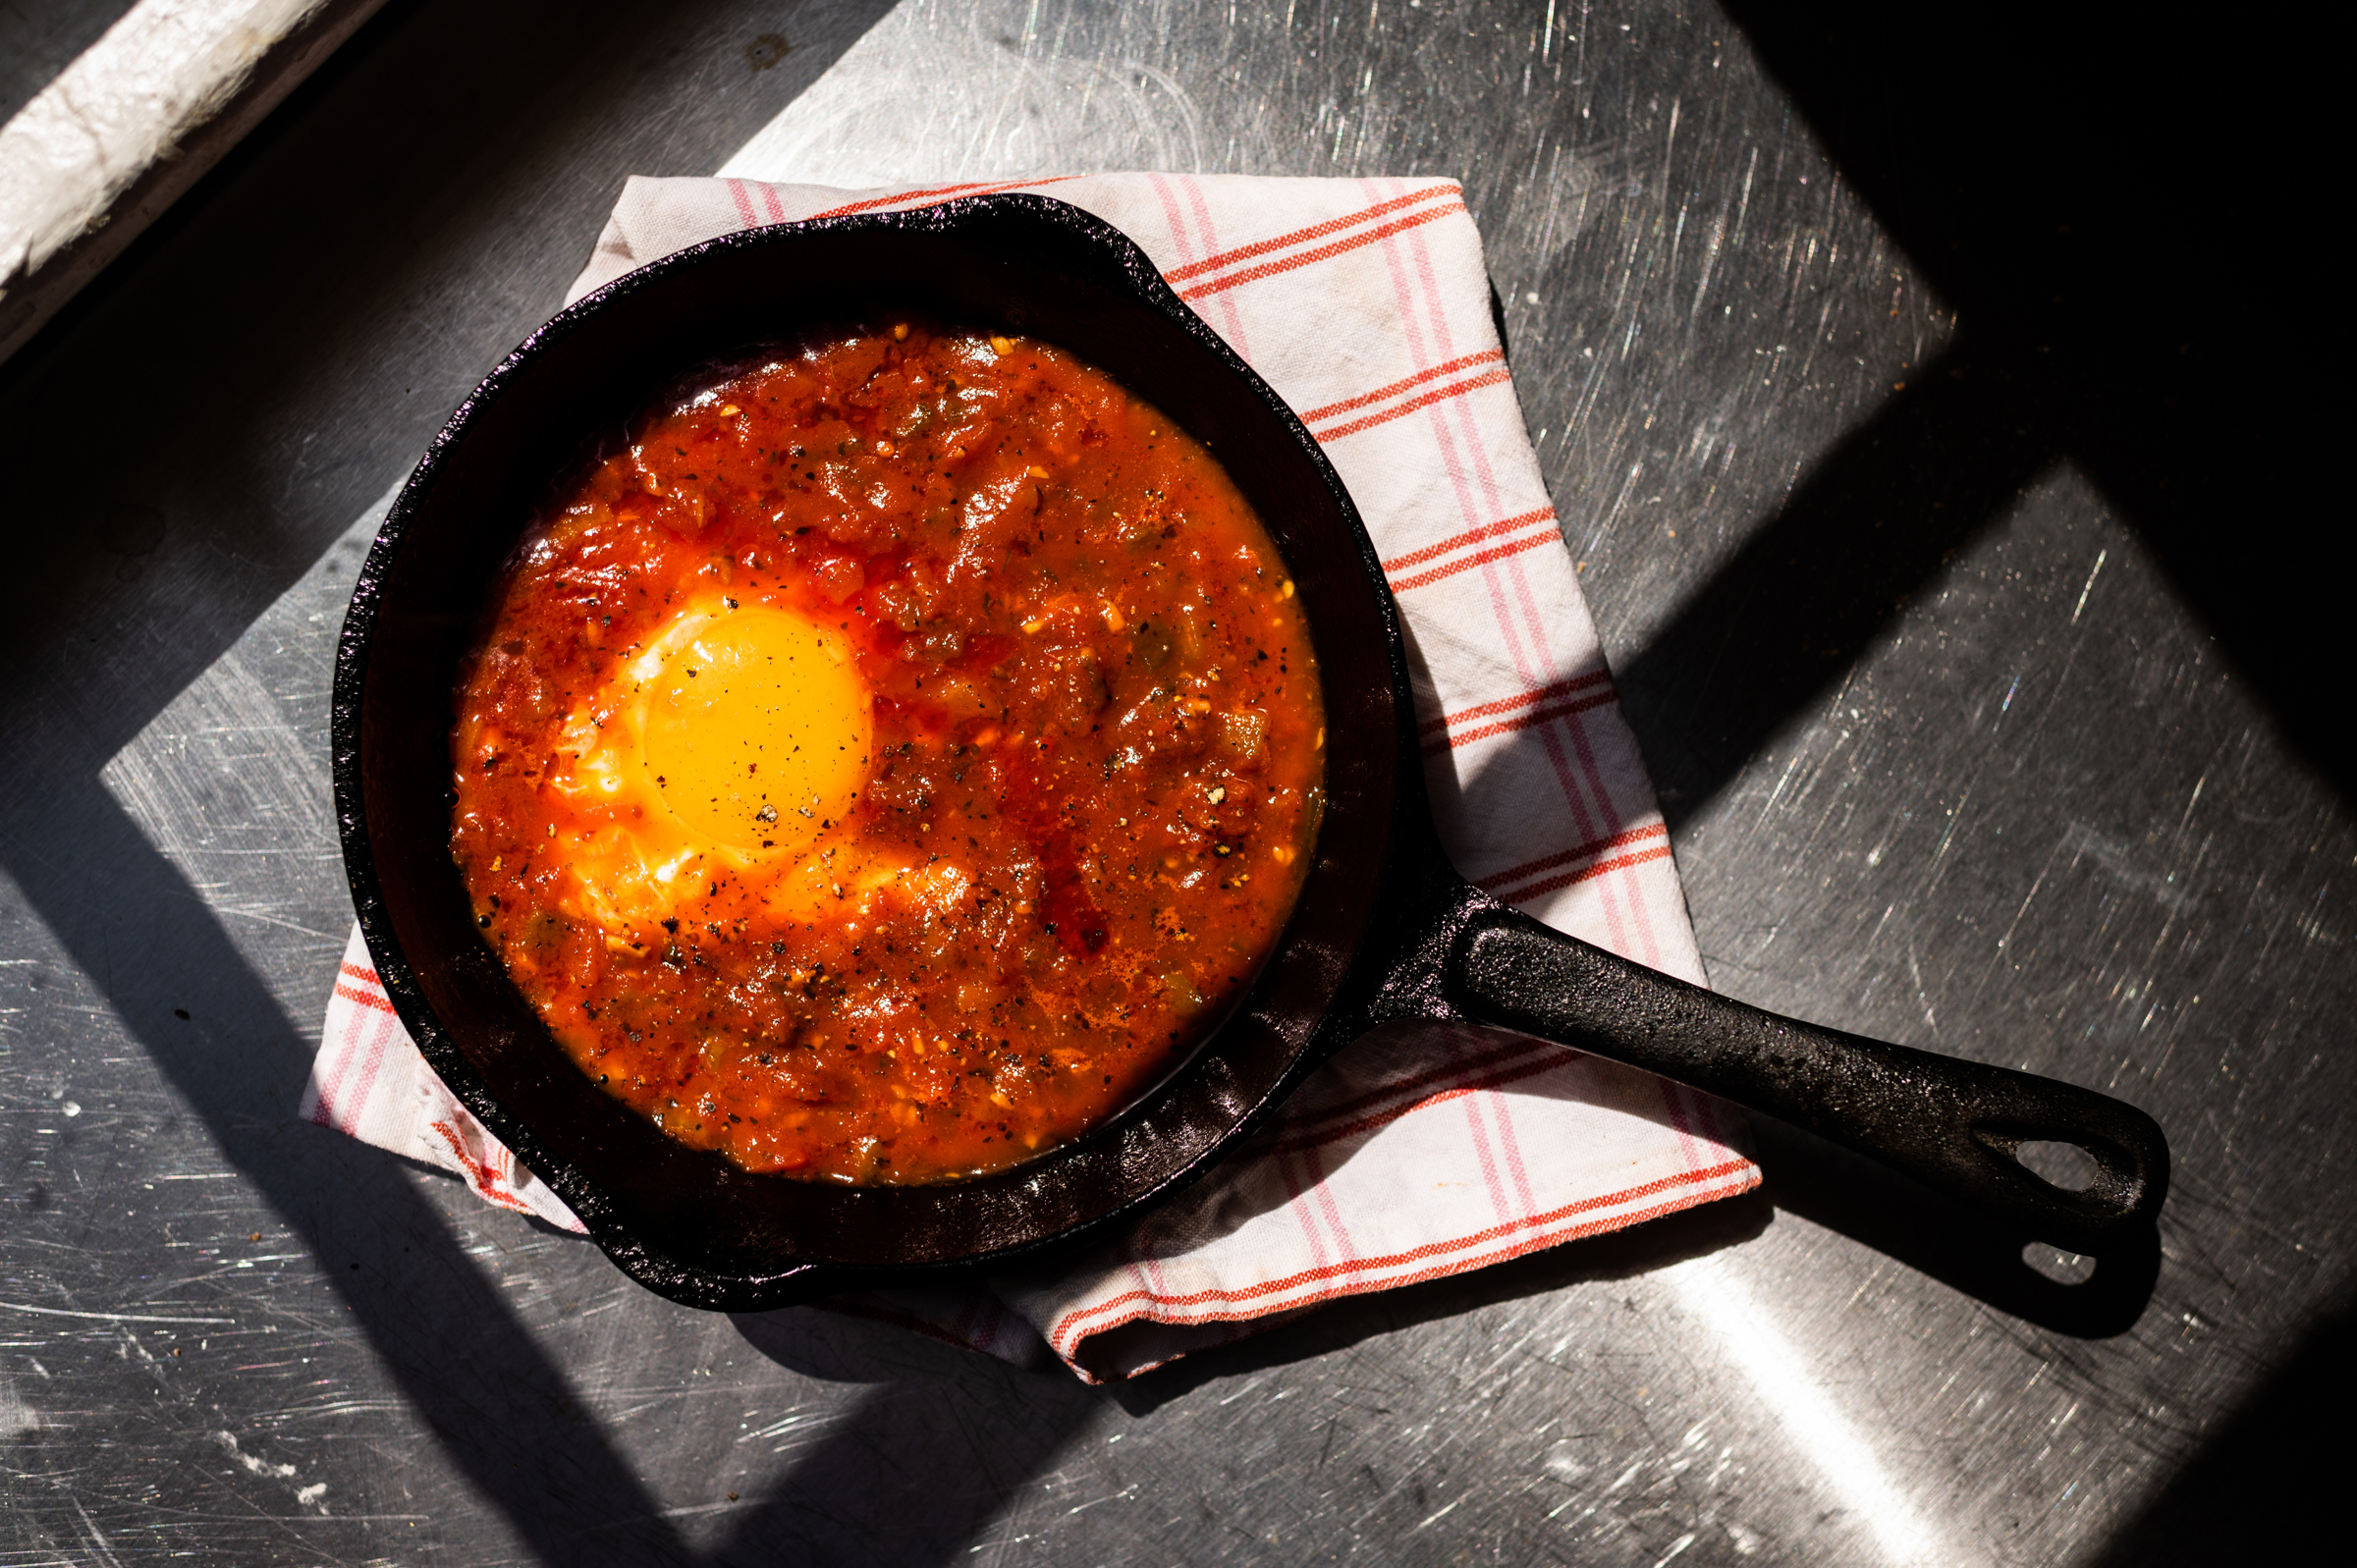 Fried egg in tomato sauce with olive oil